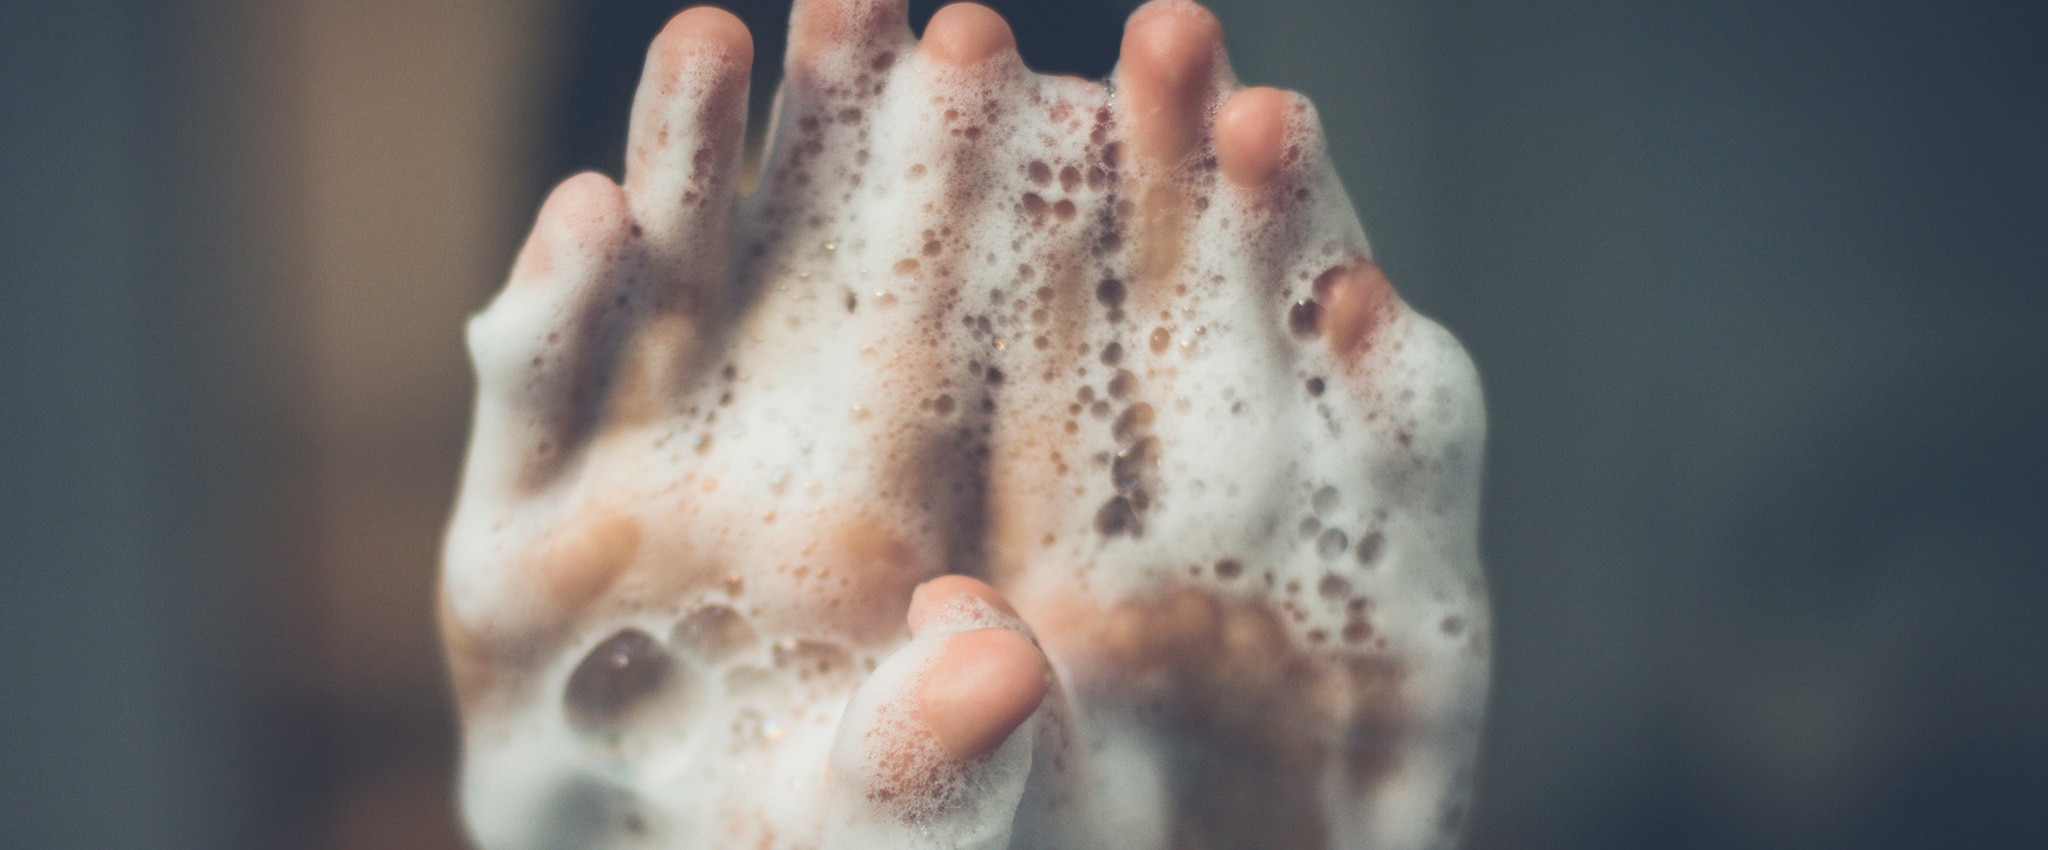 hands covered in foam being washed